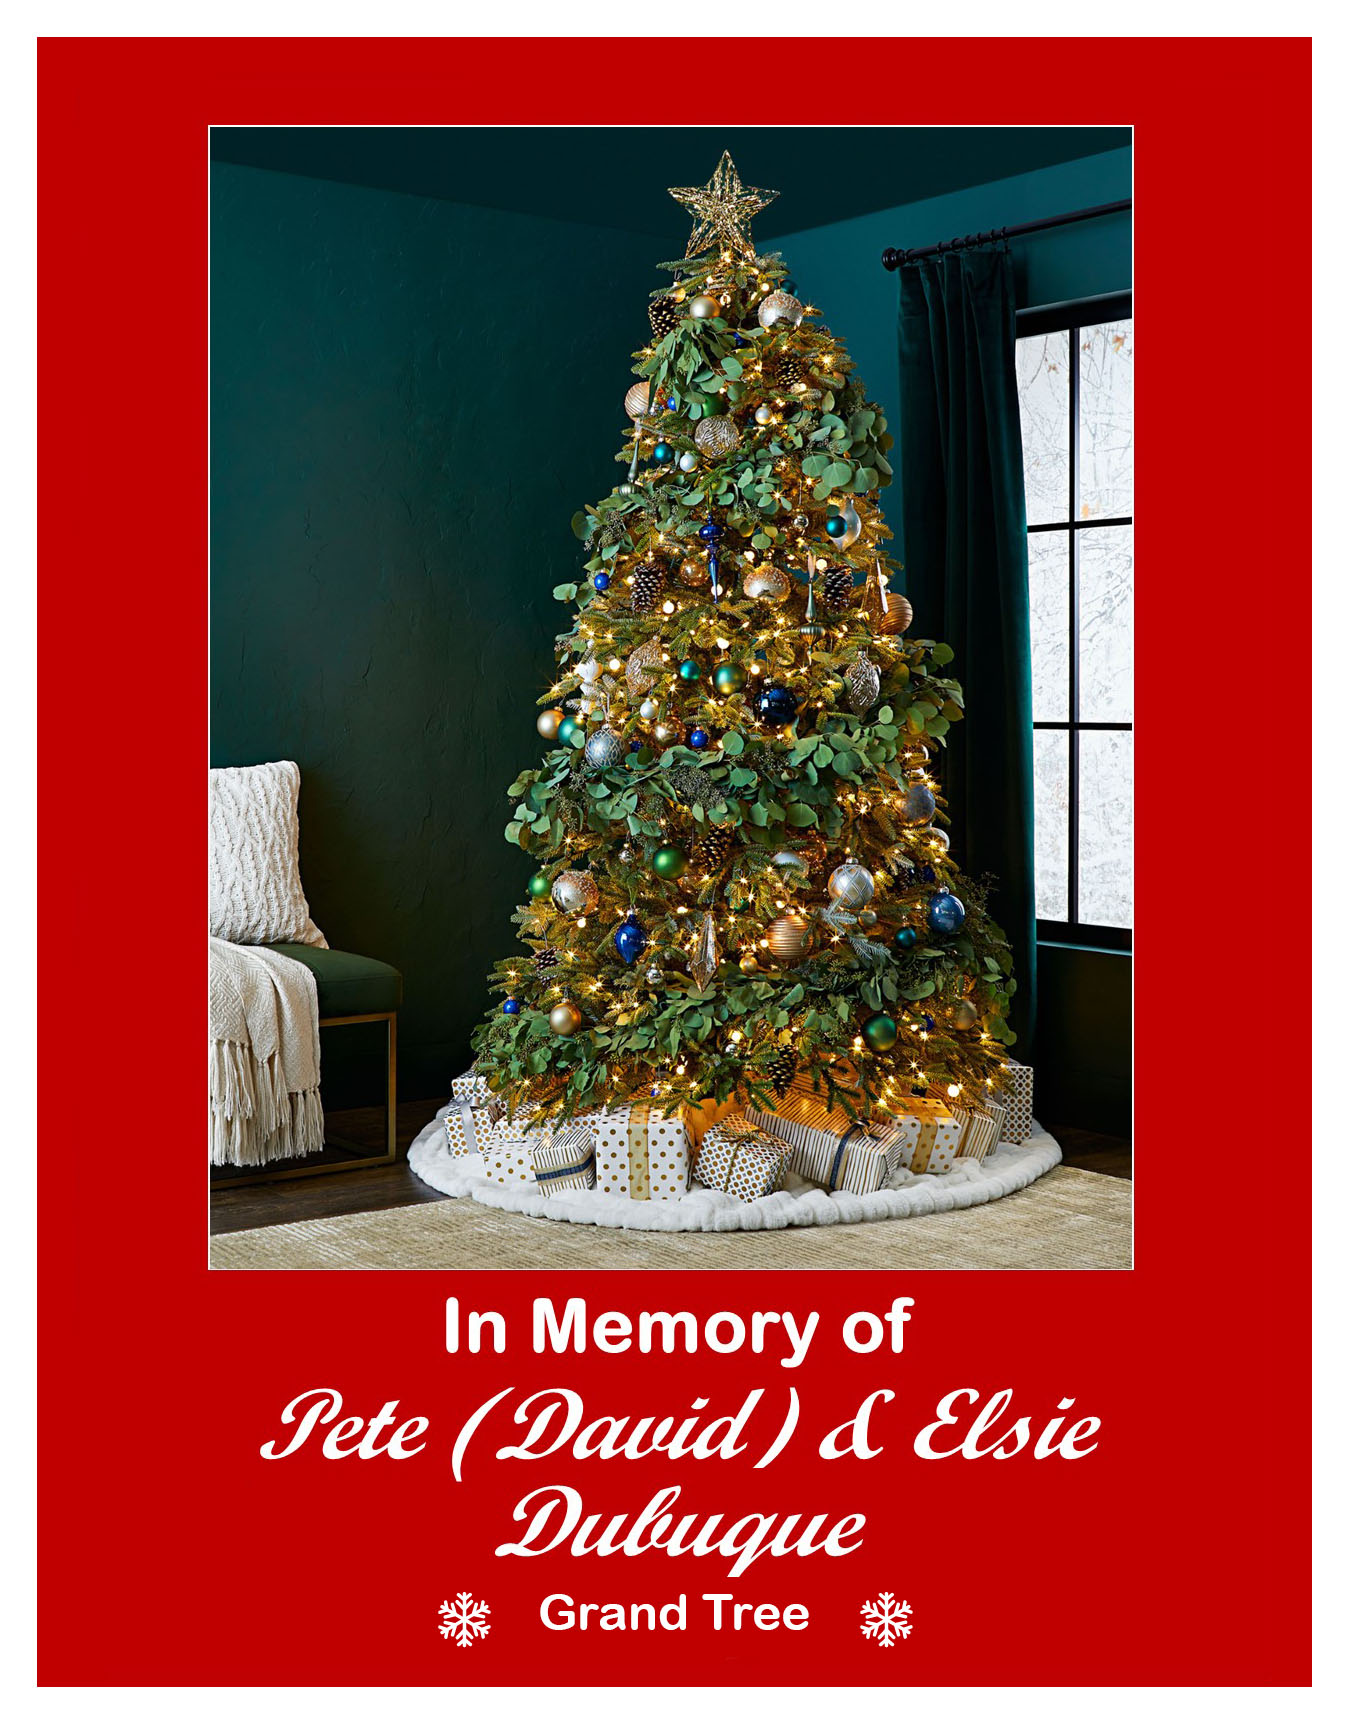 In Memory of Pete (David) and Elsie Dubuque